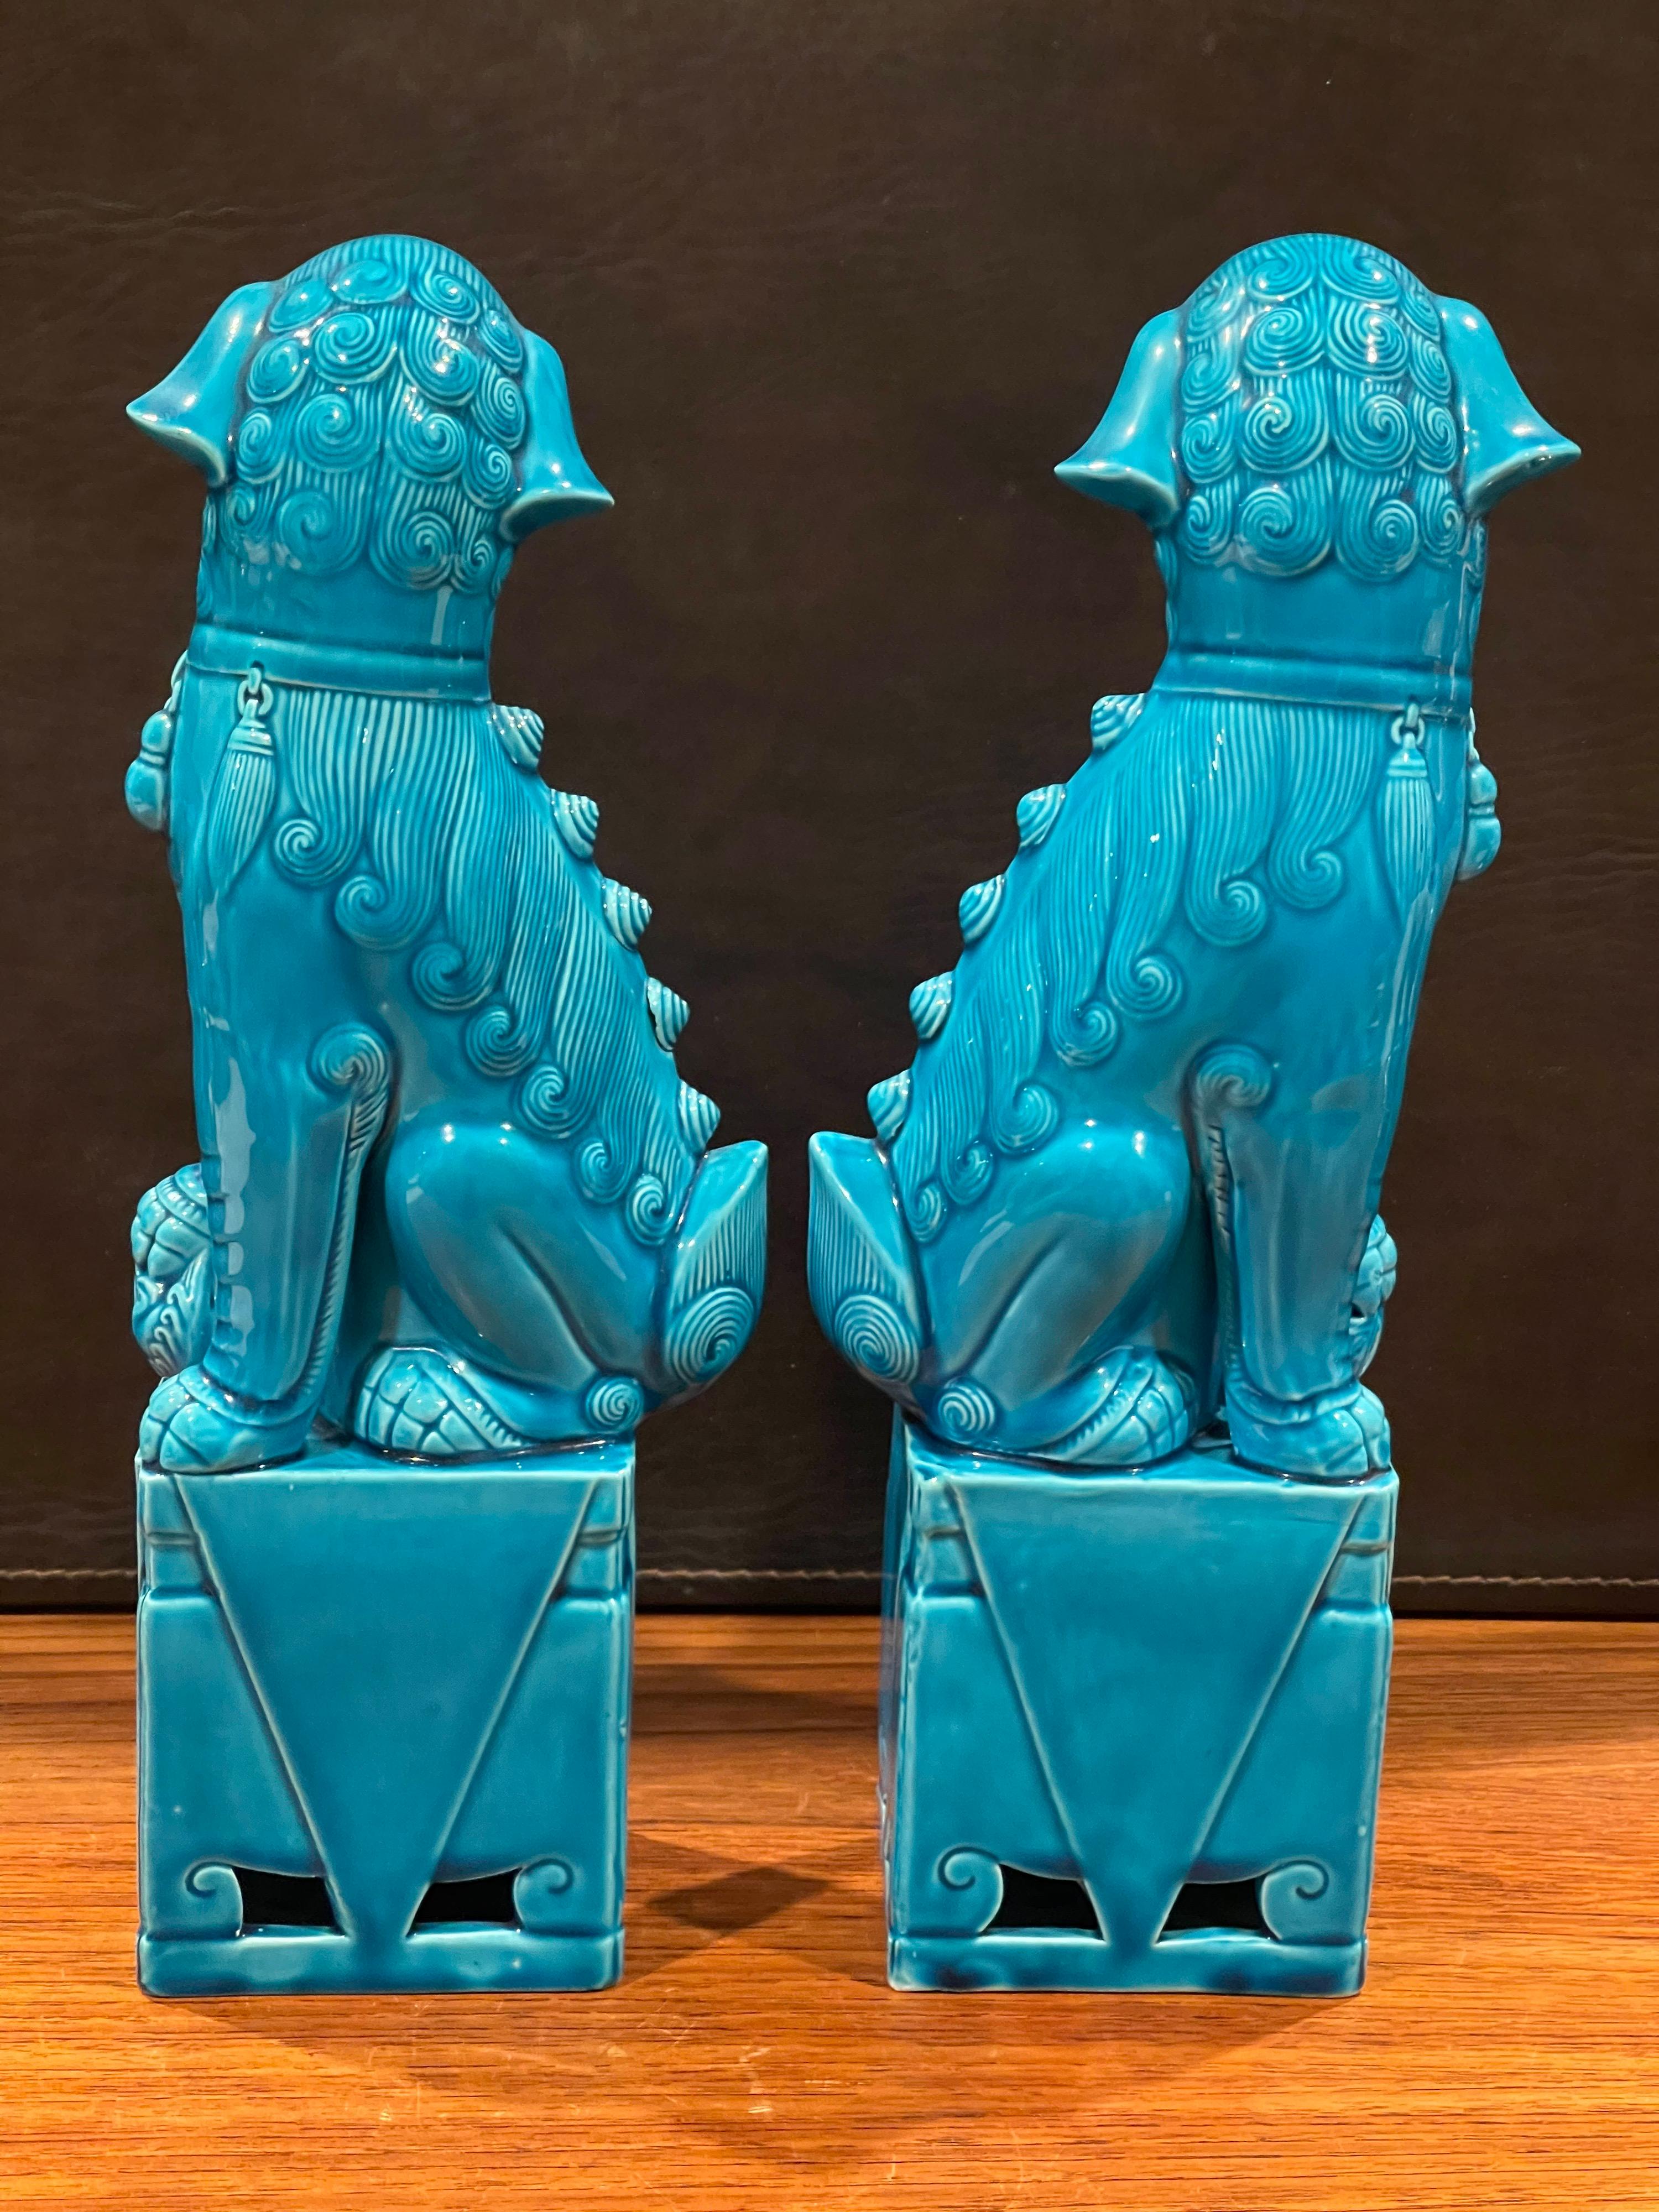 Hand-Crafted Pair of Midcentury Turquoise Blue Ceramic Foo Dog Sculptures